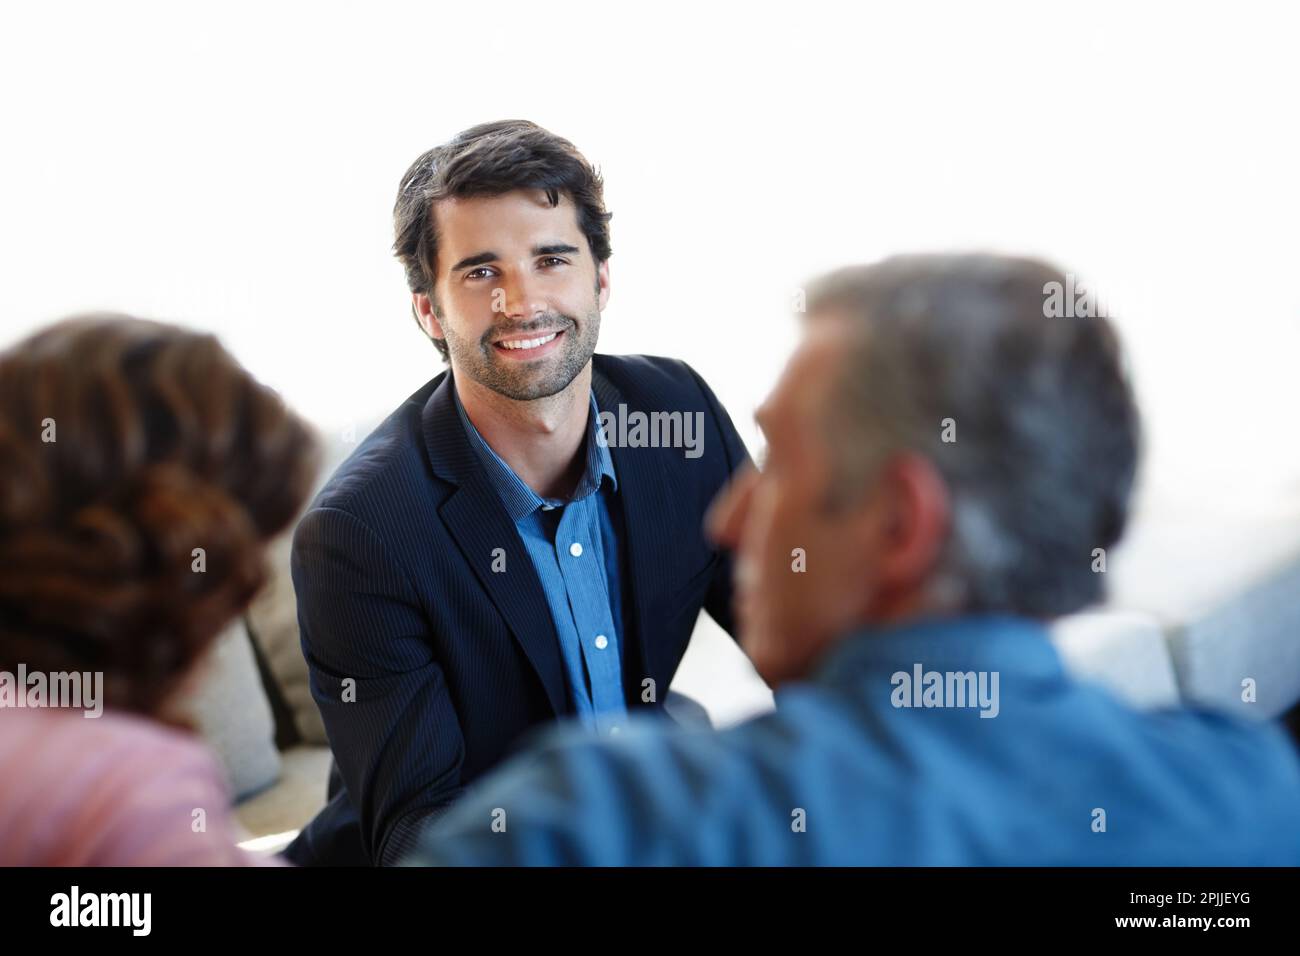 Sharing his great advice with them. A young consultant giving advice to a mature couple. Stock Photo